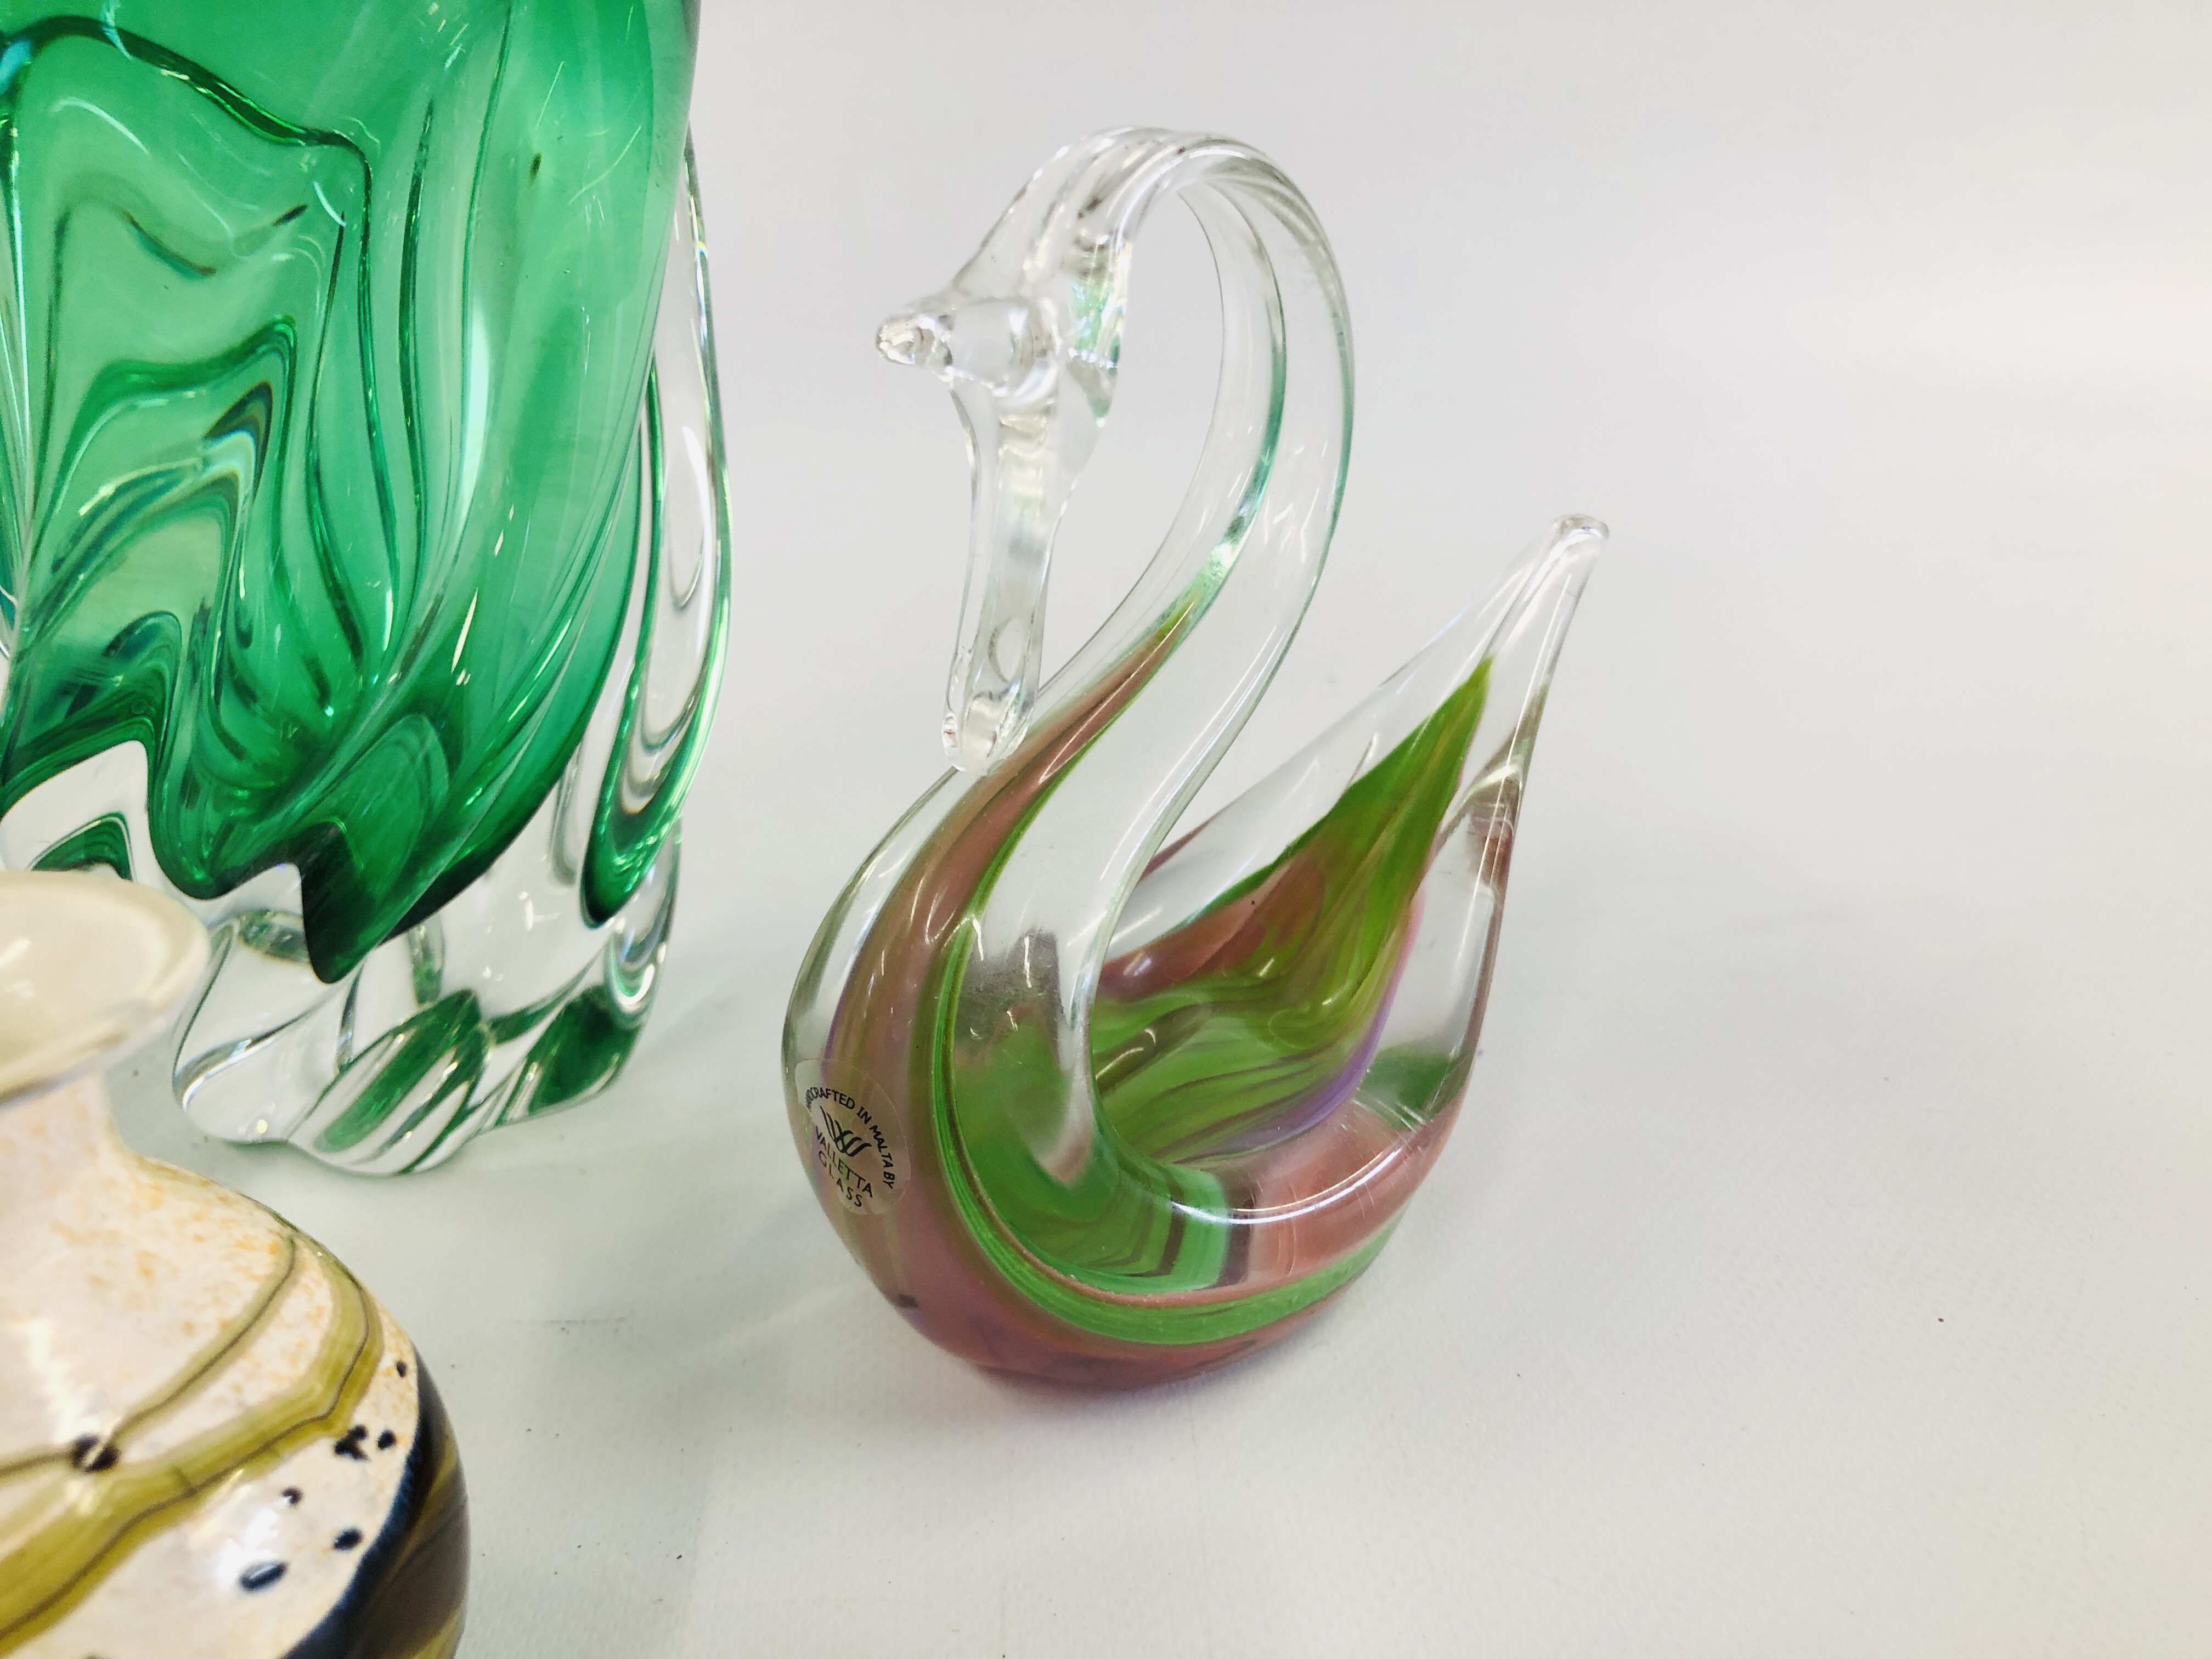 A GROUP OF ART GLASS TO INCLUDE A SMALL STUDIO GLASS VASE MARKED "GOZO" H 7.5CM. - Image 4 of 7